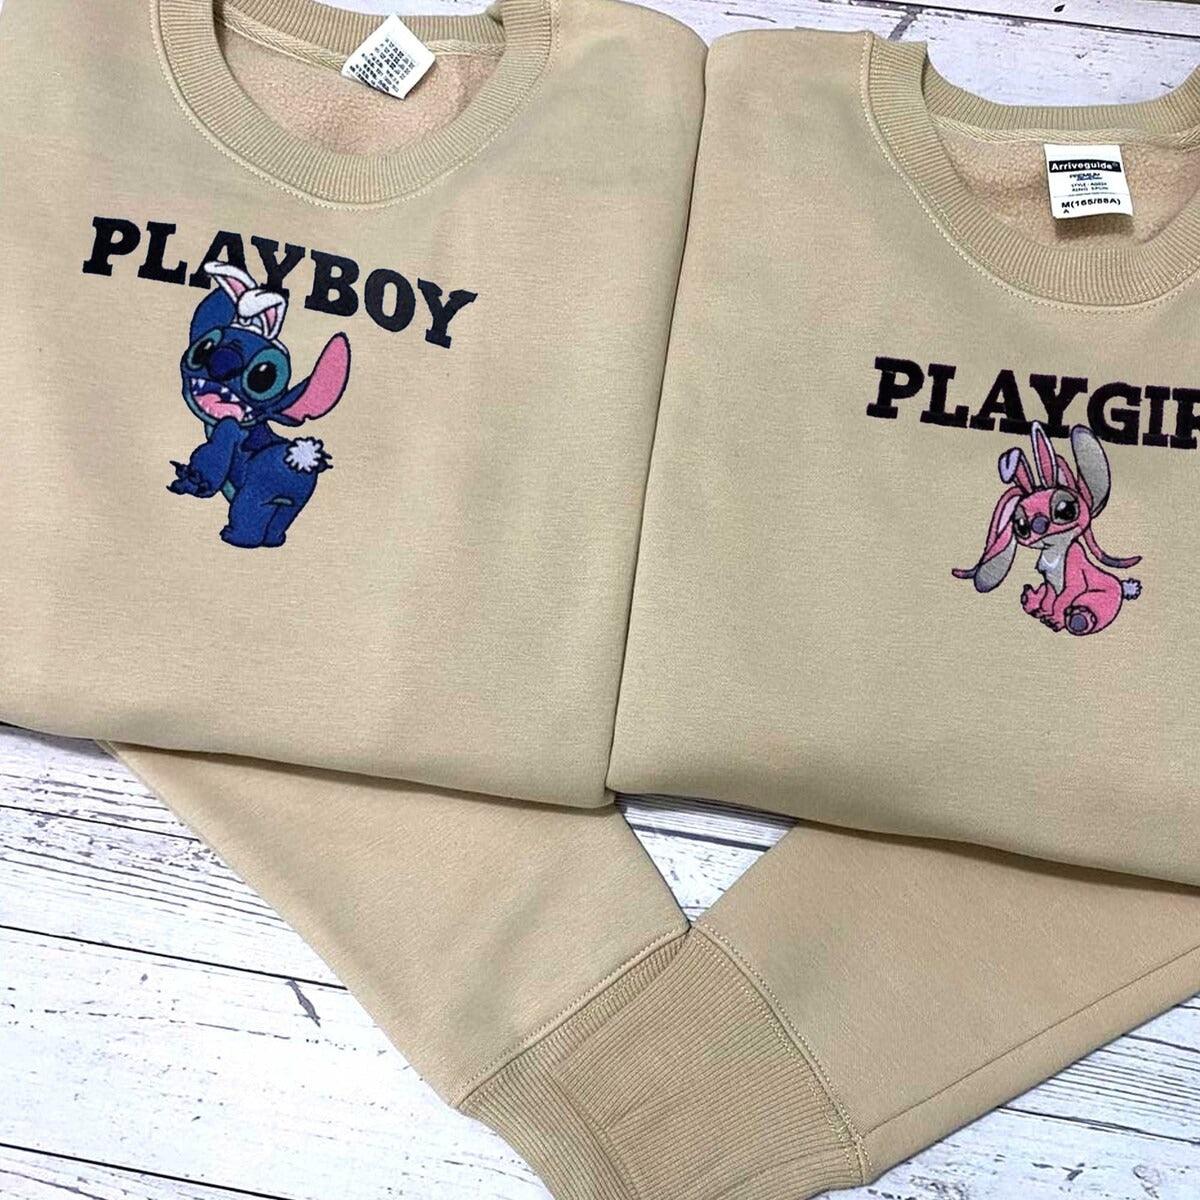 Custom Embroidered Hoodies For Couples, Custom Matching Couple Hoodies, Cartoon Stitch Inspired Funny Couples Embroidered Matching Hoodie